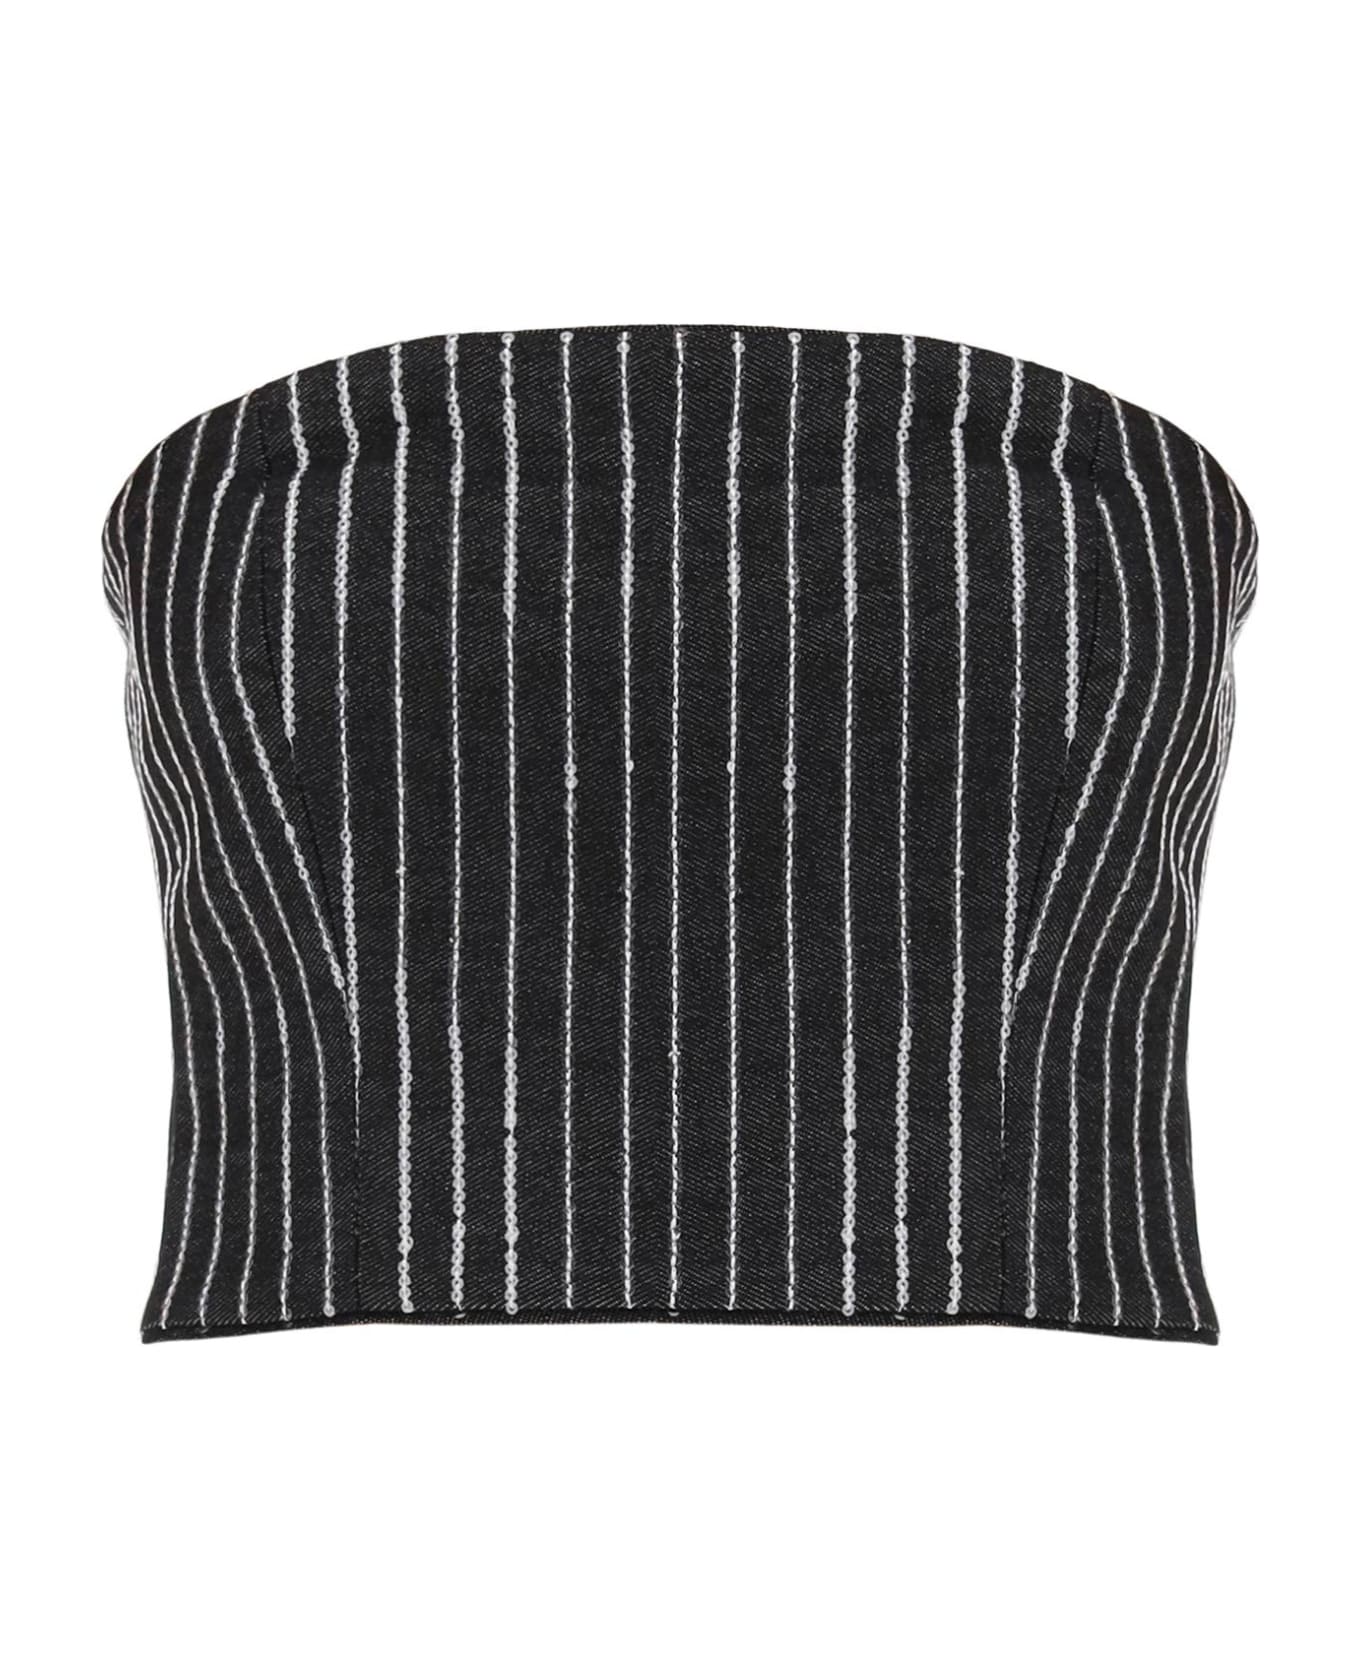 Rotate by Birger Christensen Cropped Top With Sequined Stripes - BLACK (Black) トップス